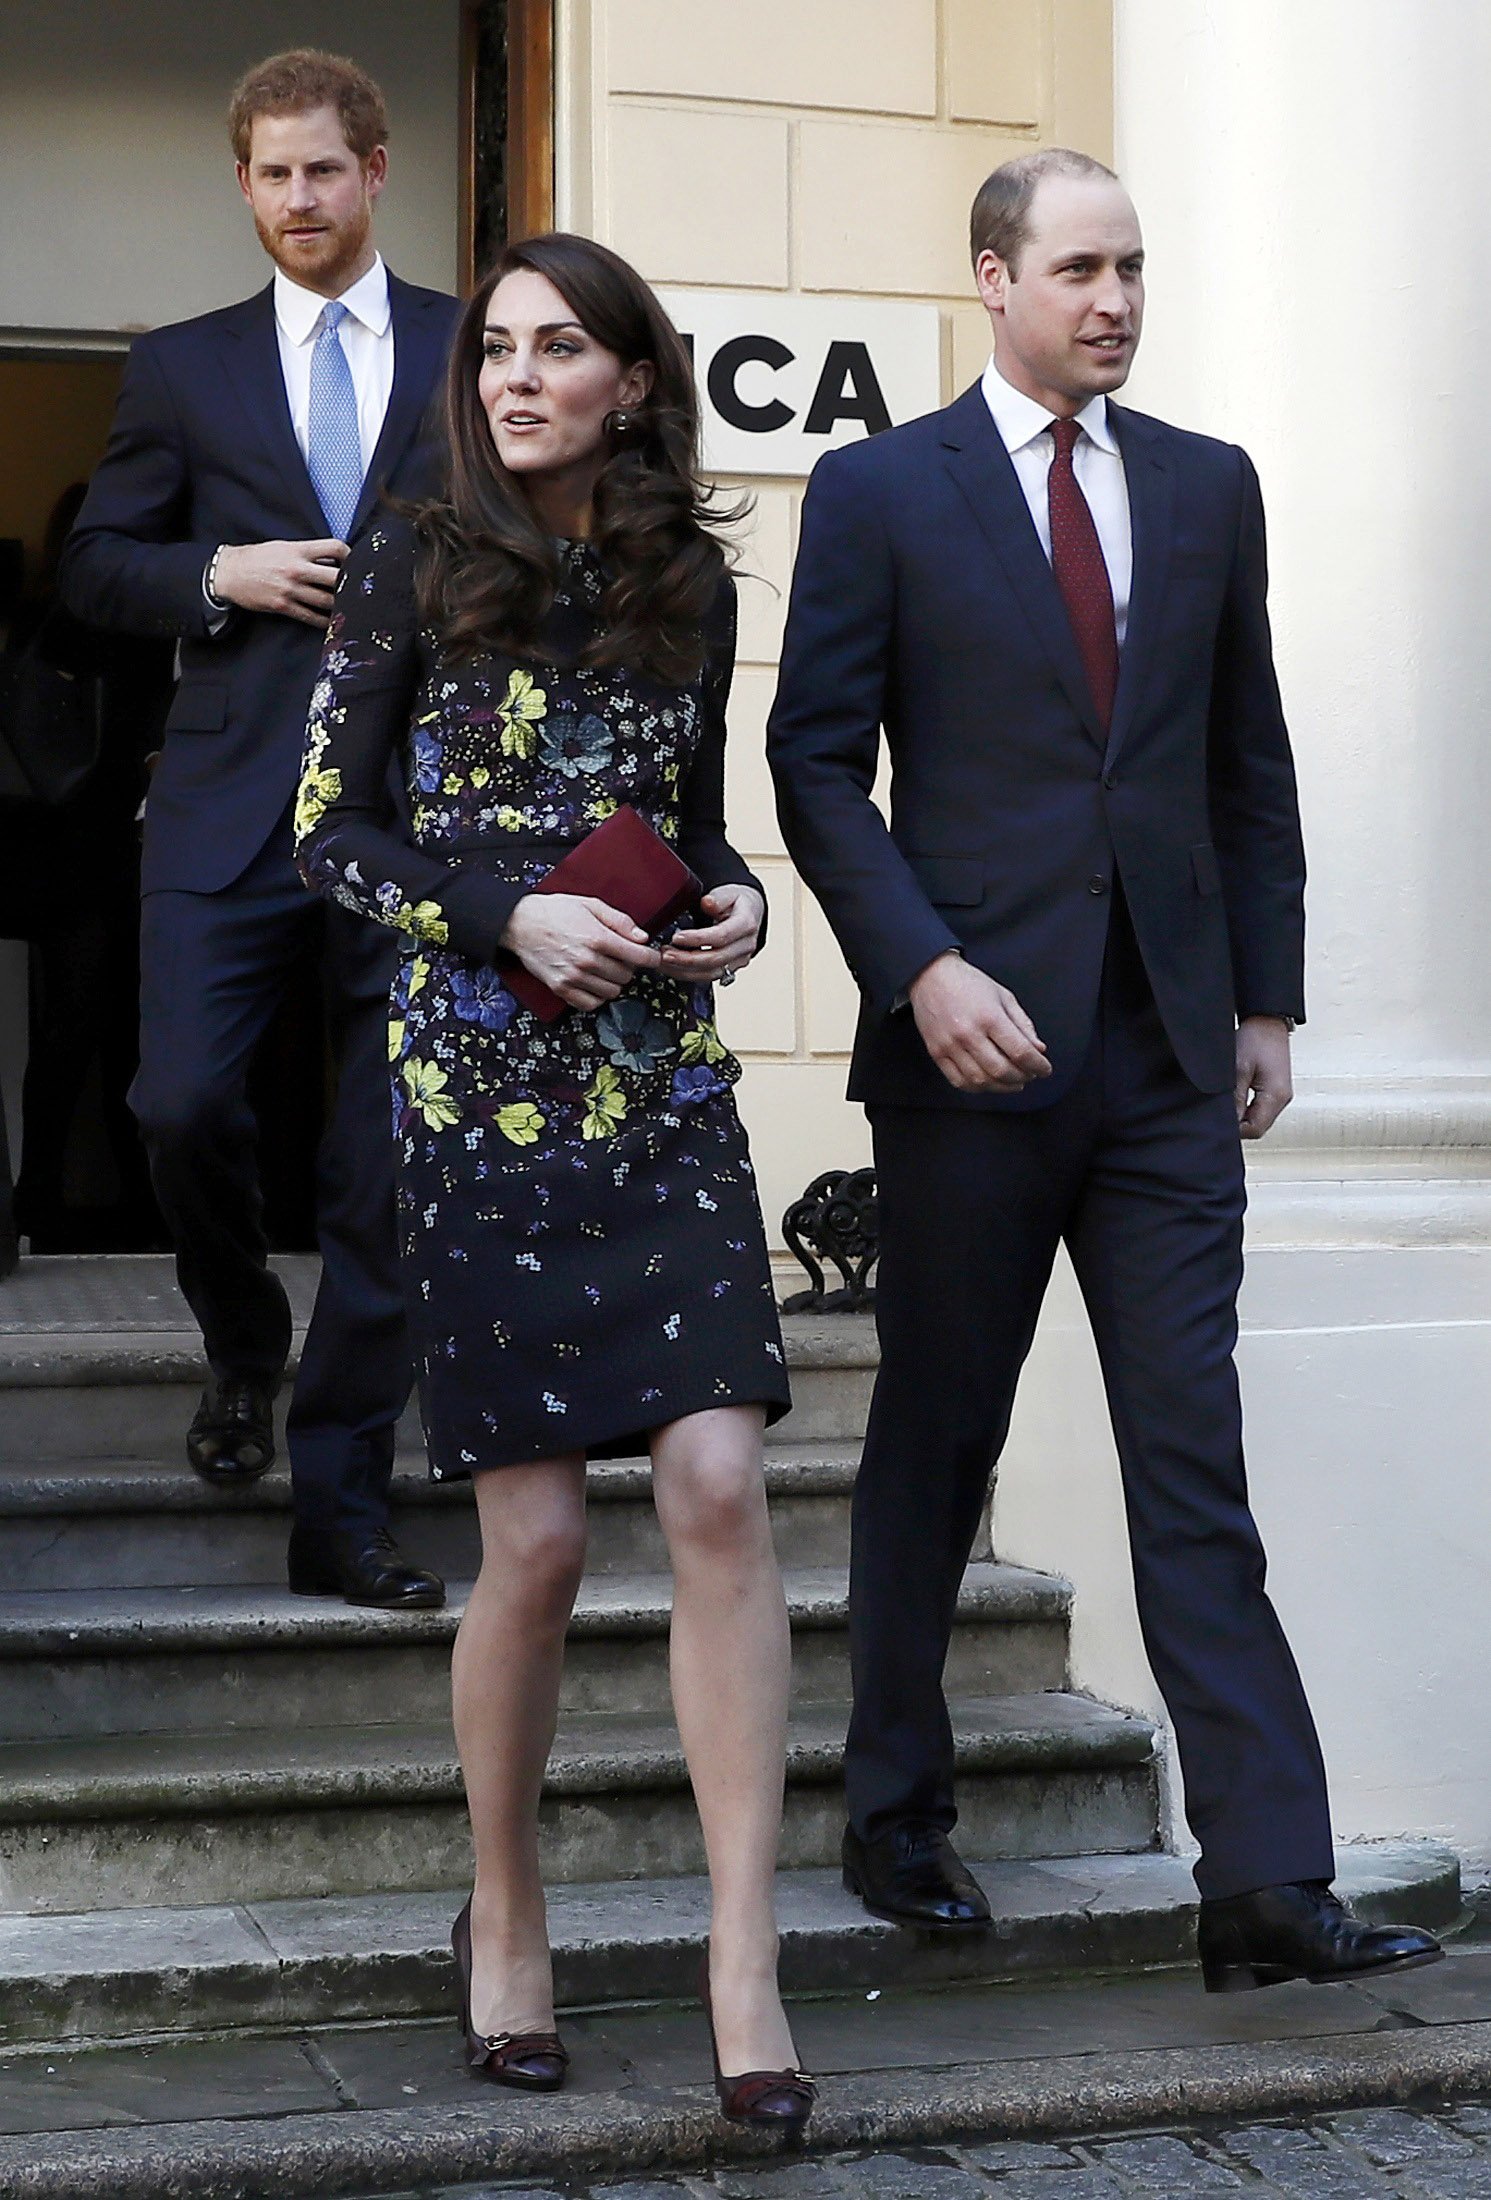 Prince Harry, Prince William, Duke of Cambridge and Catherine, Duchess Of Cambridge are seen on January 17, 2017 in London